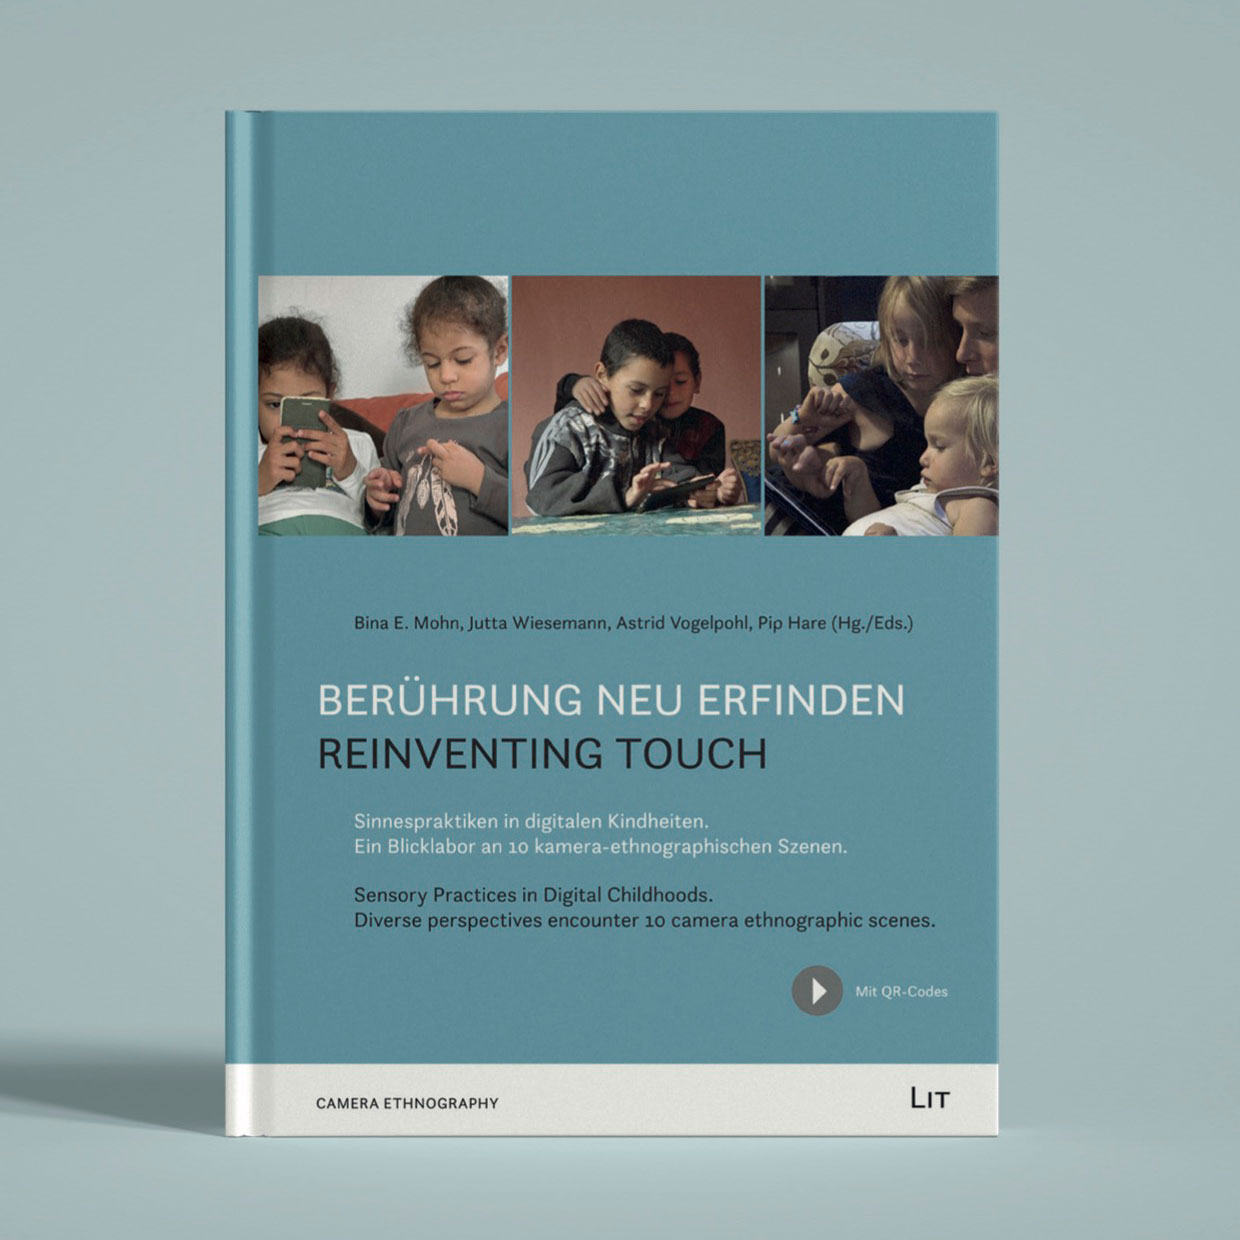 Book “Reinventing Touch”